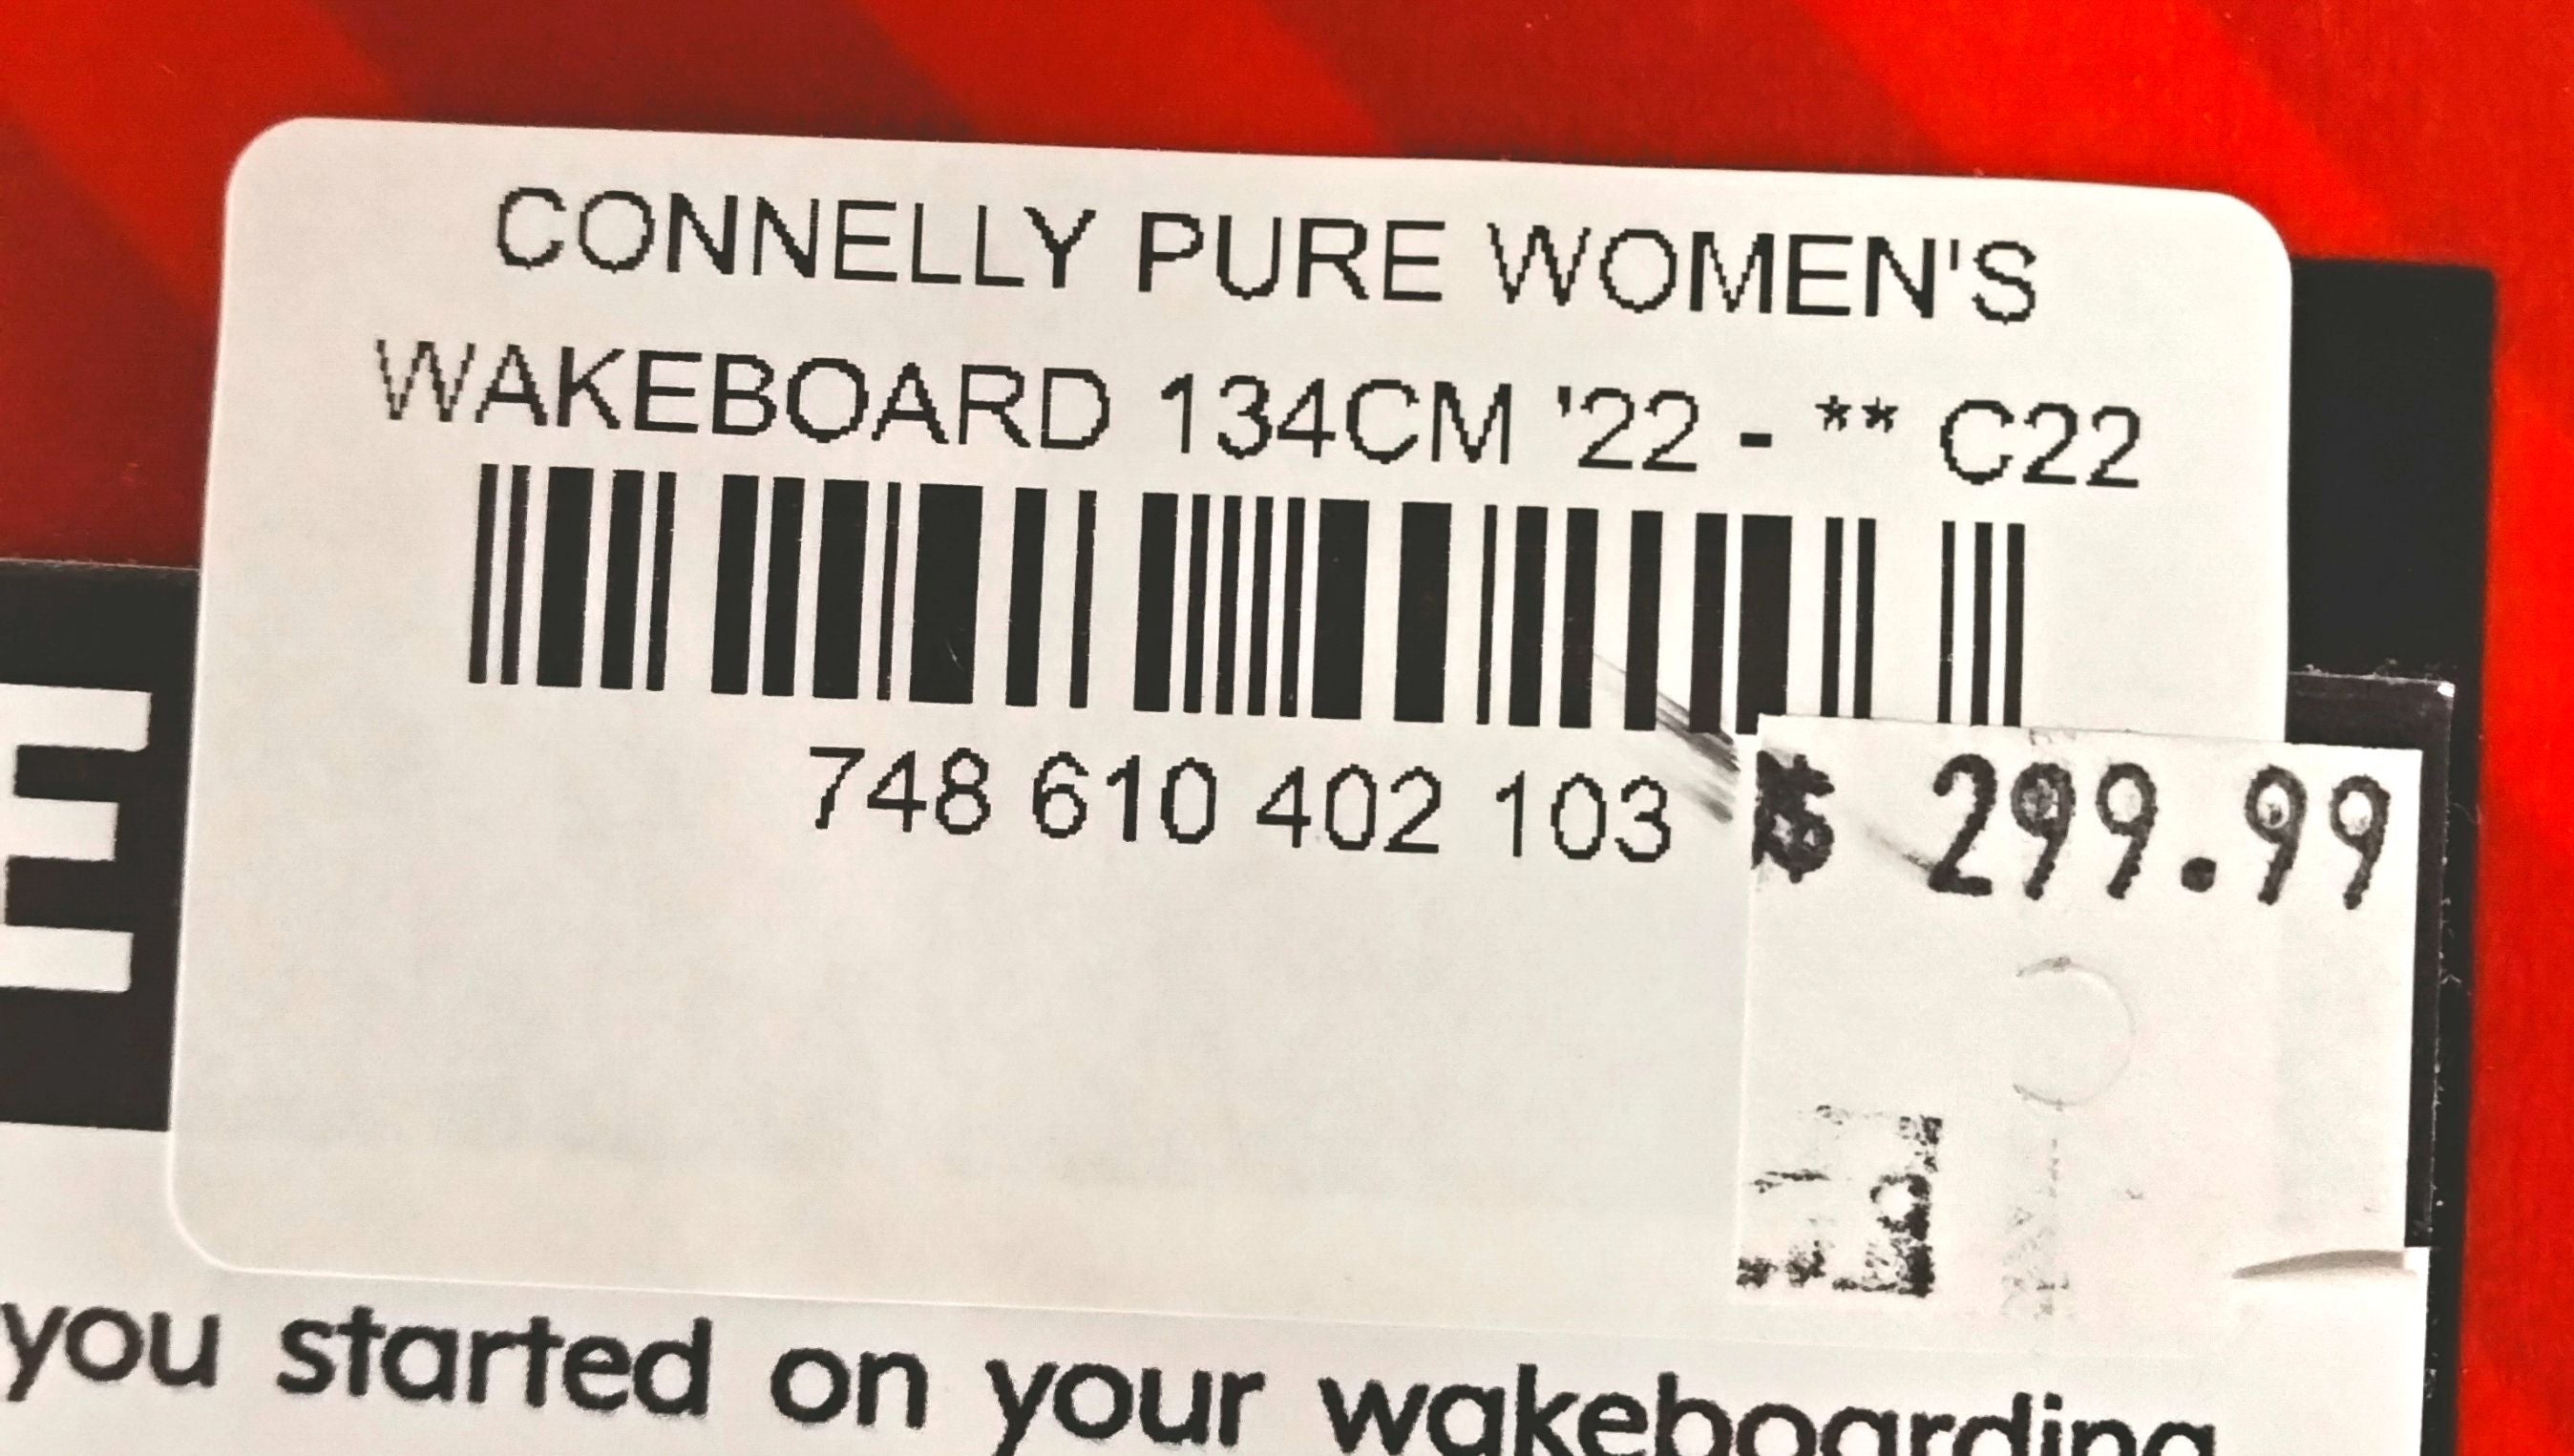 2022 Connelly Pure Women's Wakeboard 134cm Red / White - 62224256 MSRP $299 NEW